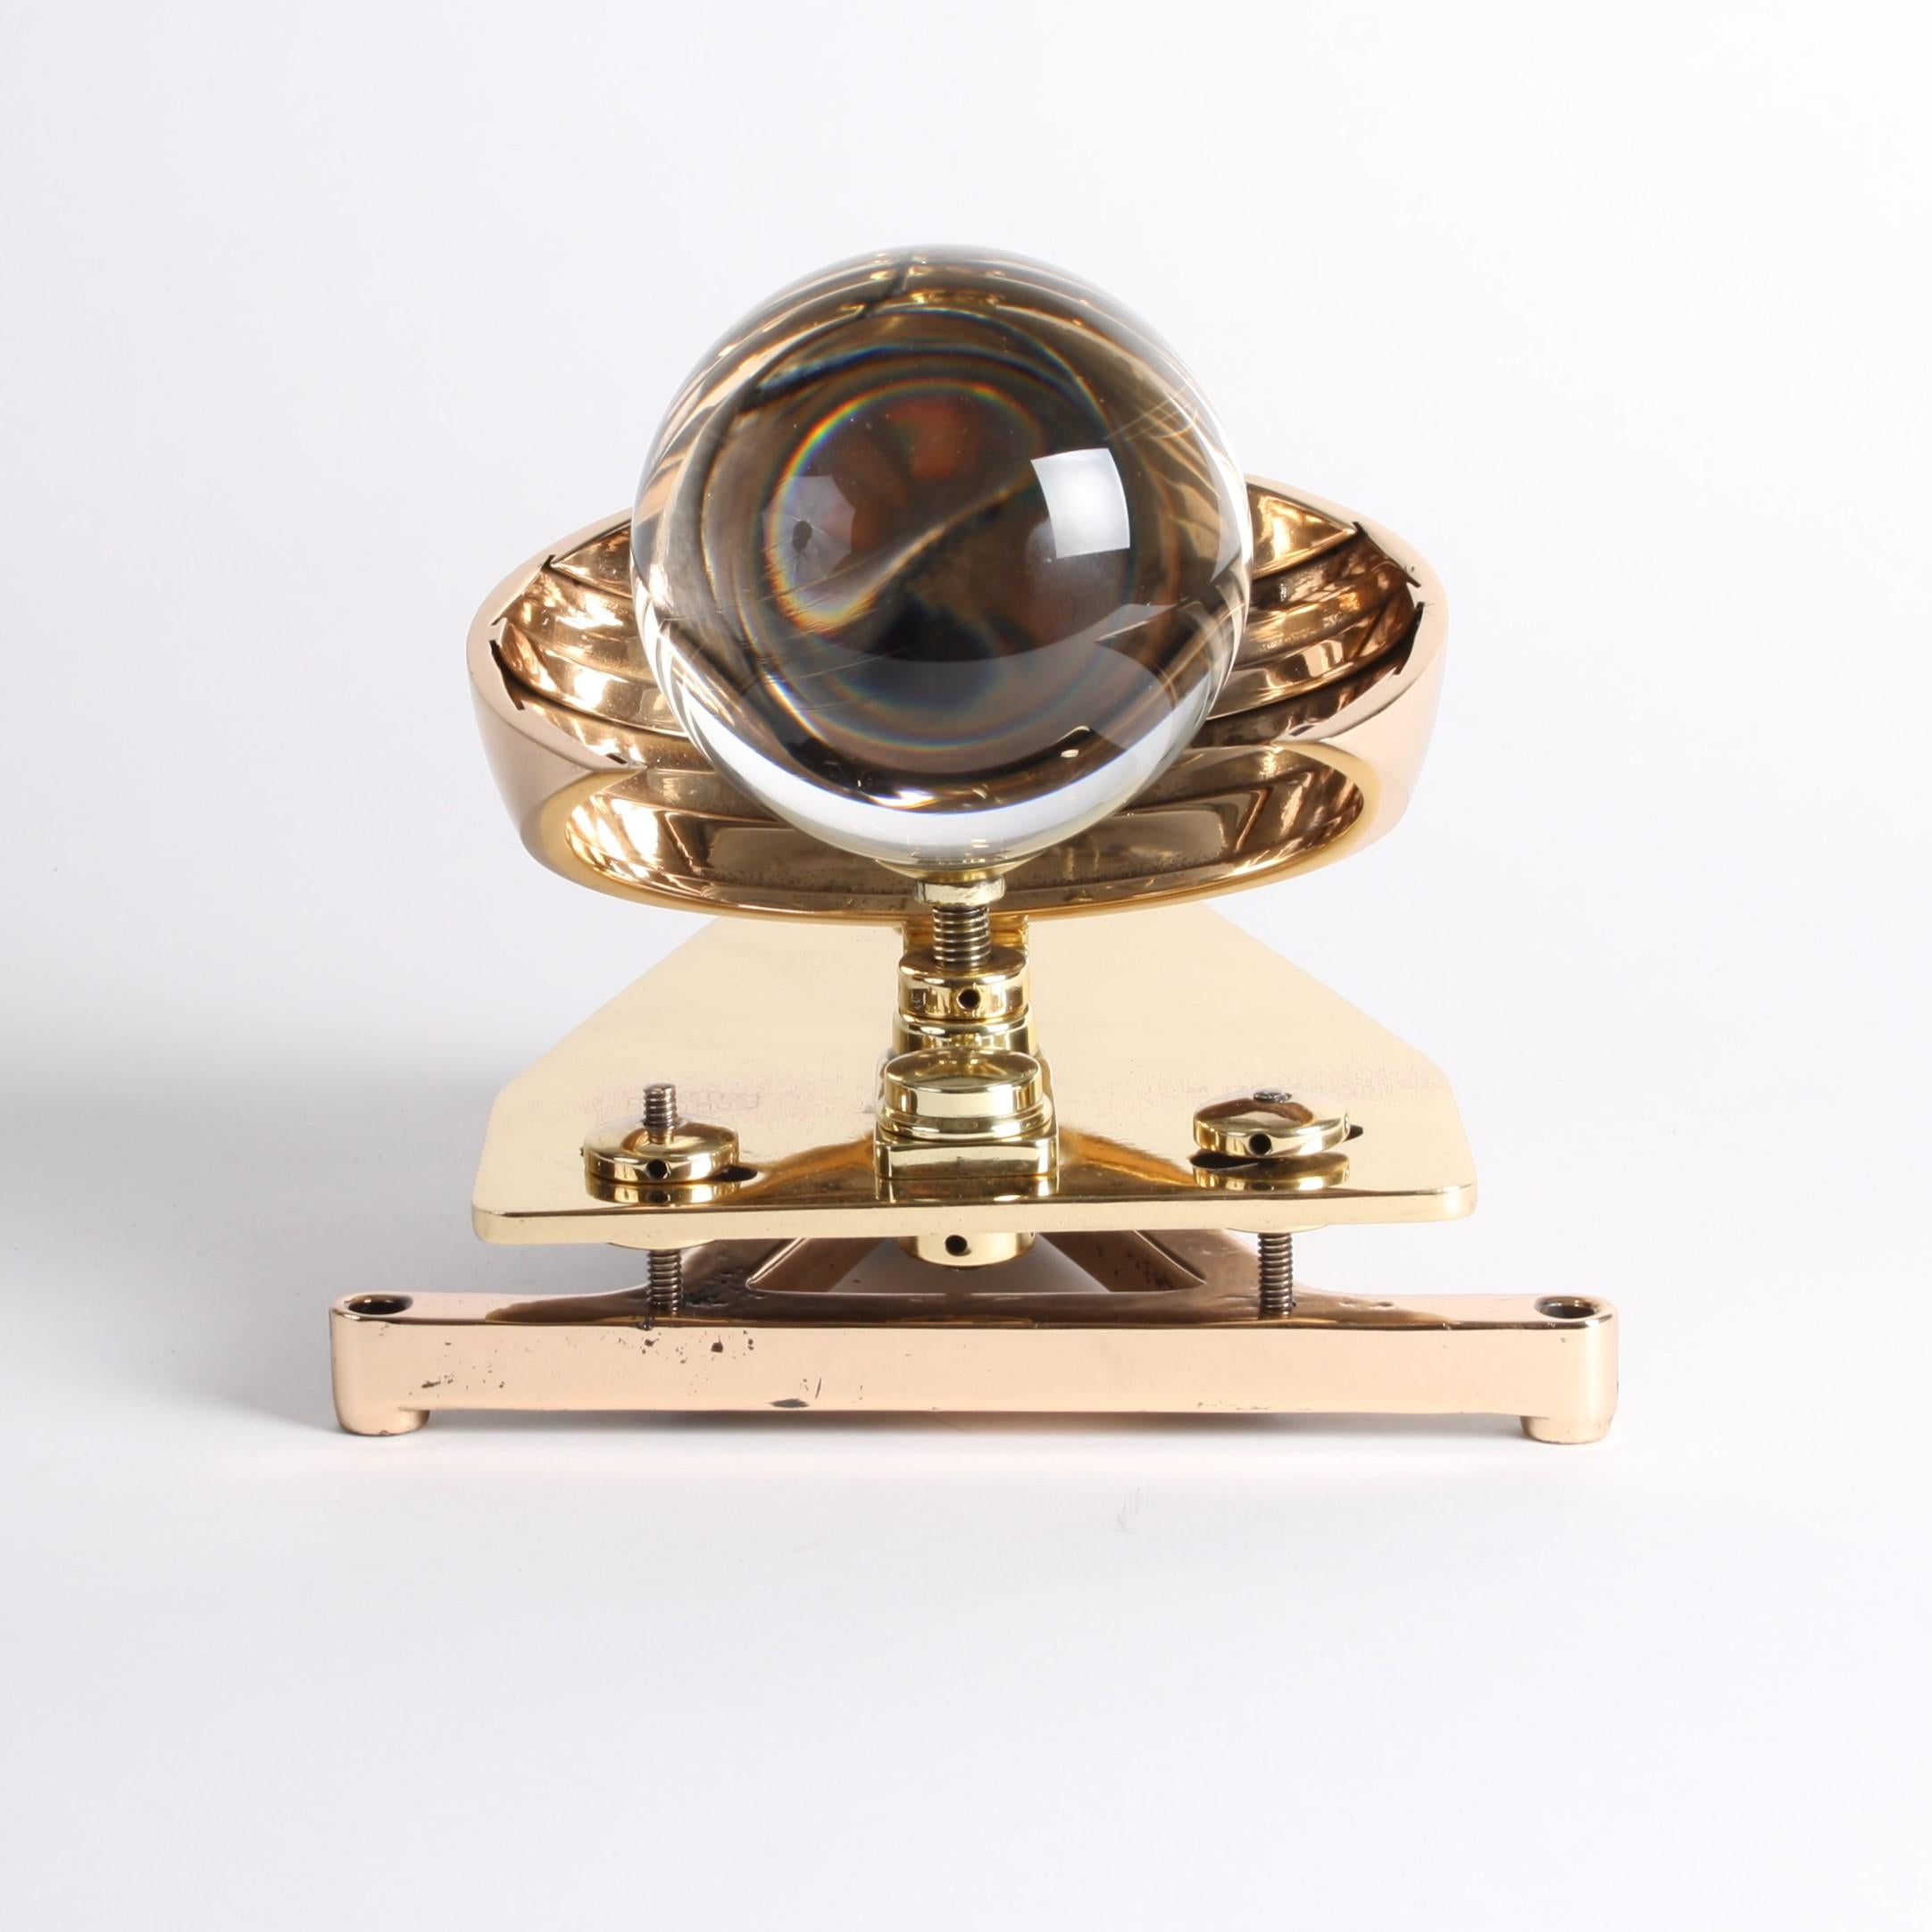 20th Century Campbell–Stokes Sphere Sunshine Recorder by Casella of London